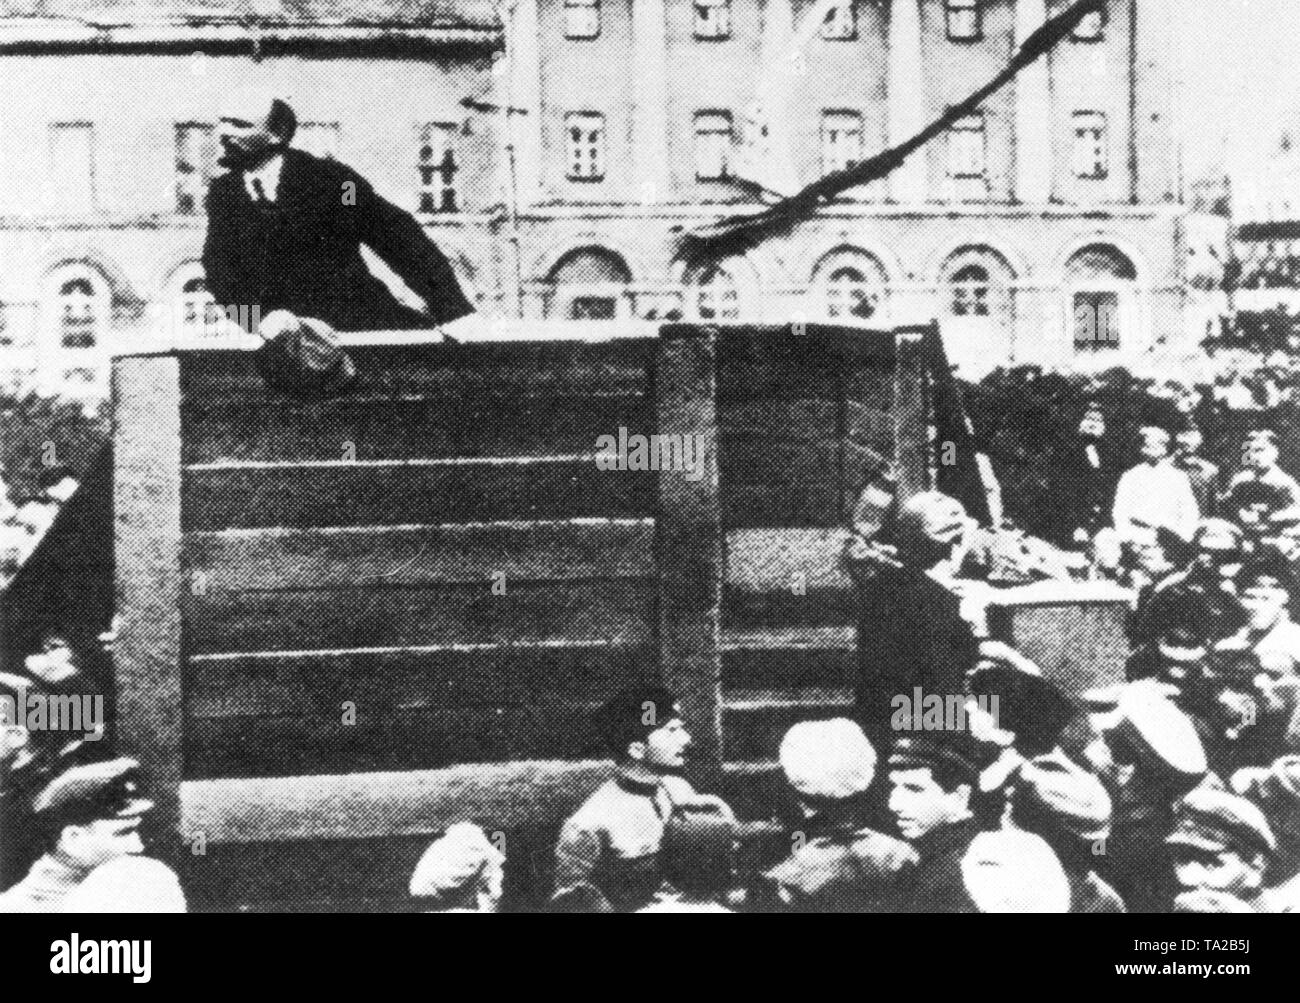 Vladimir Ilyich Lenin stands on a rostrum and gives a speech. Leon Trotsky, who actually stands on the stairway to the tribune, was airbrushed out from the public images as Stalin gained power. Stock Photo